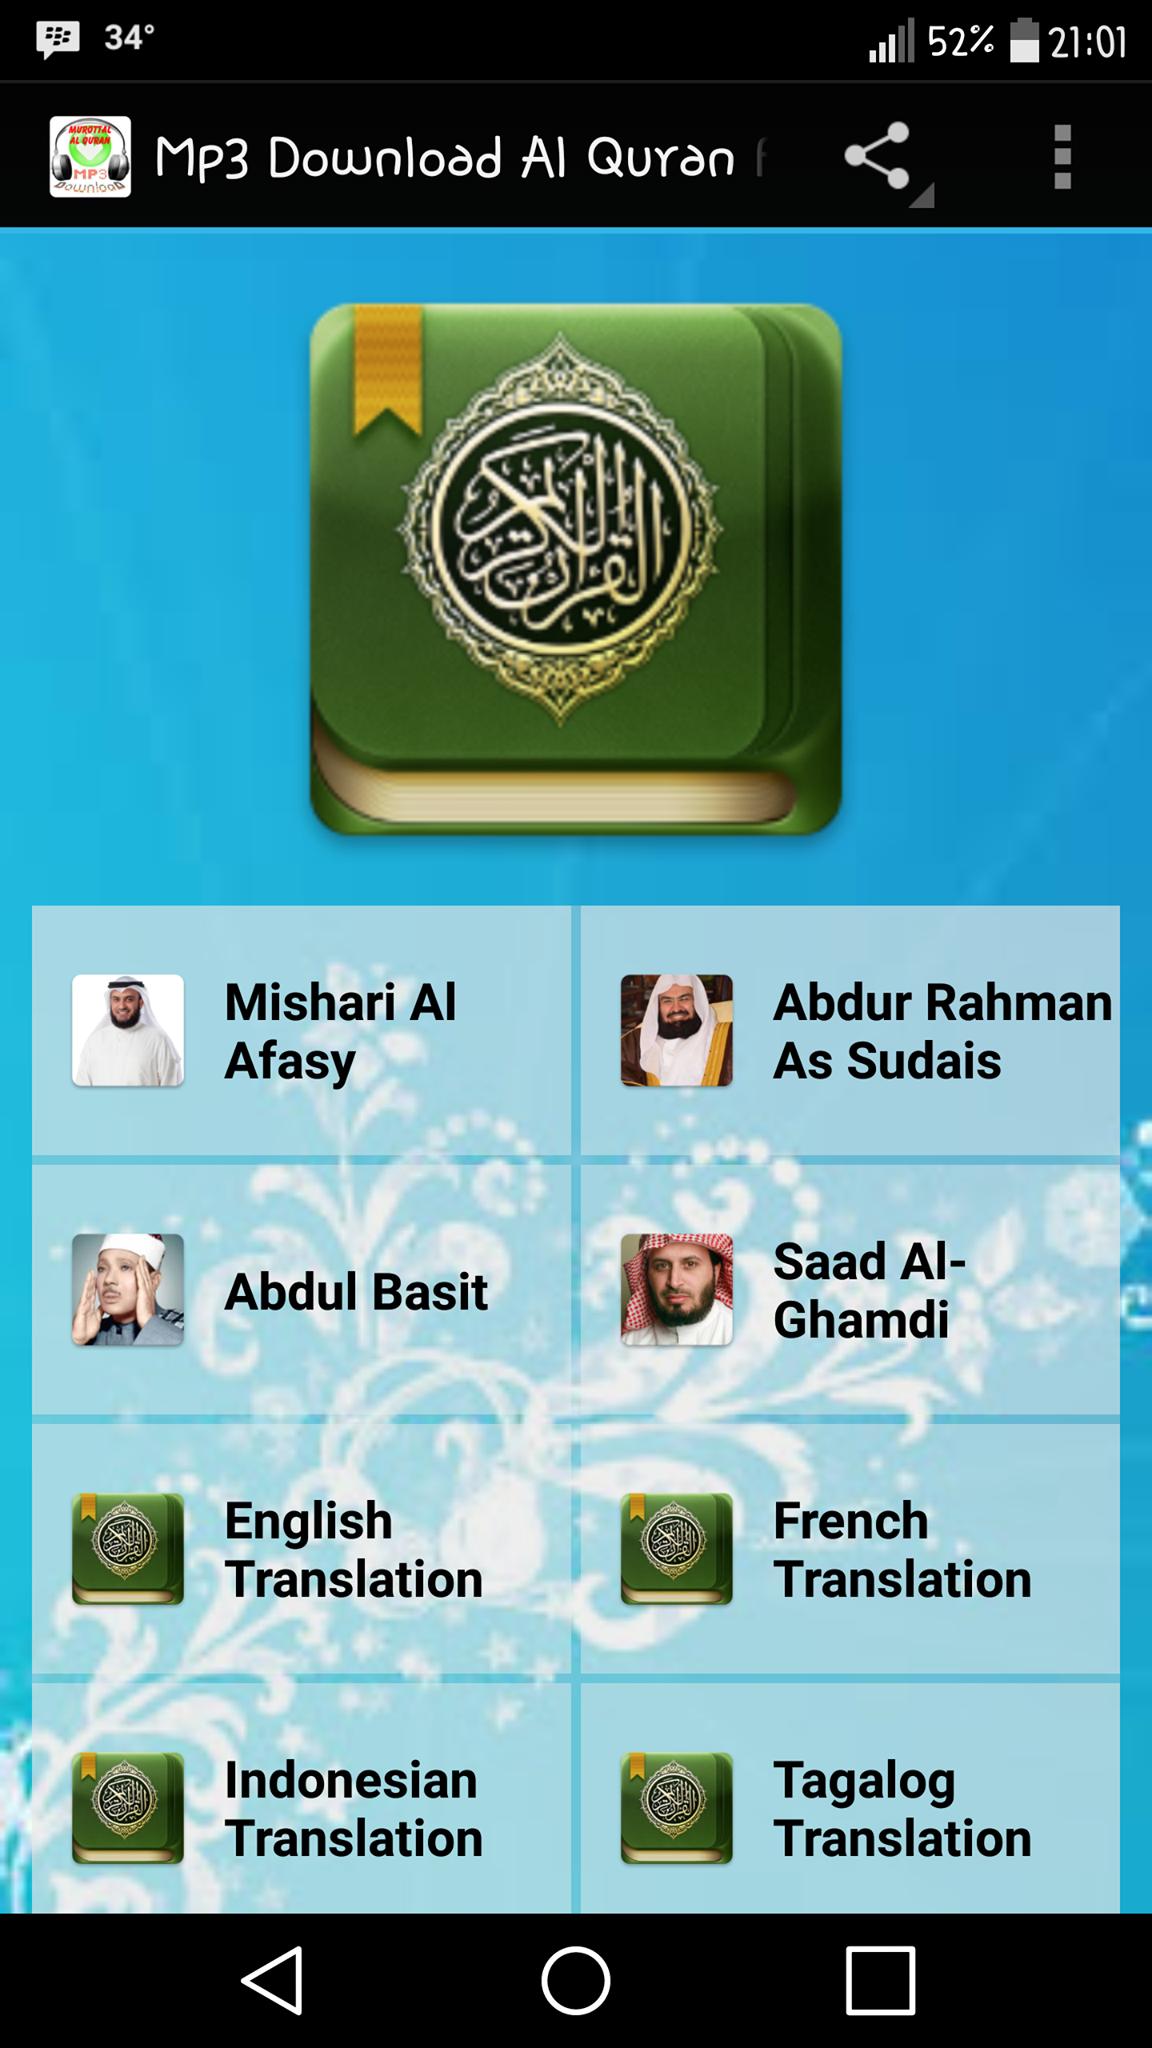 Mp3 Download Al Quran Free for Android - APK Download